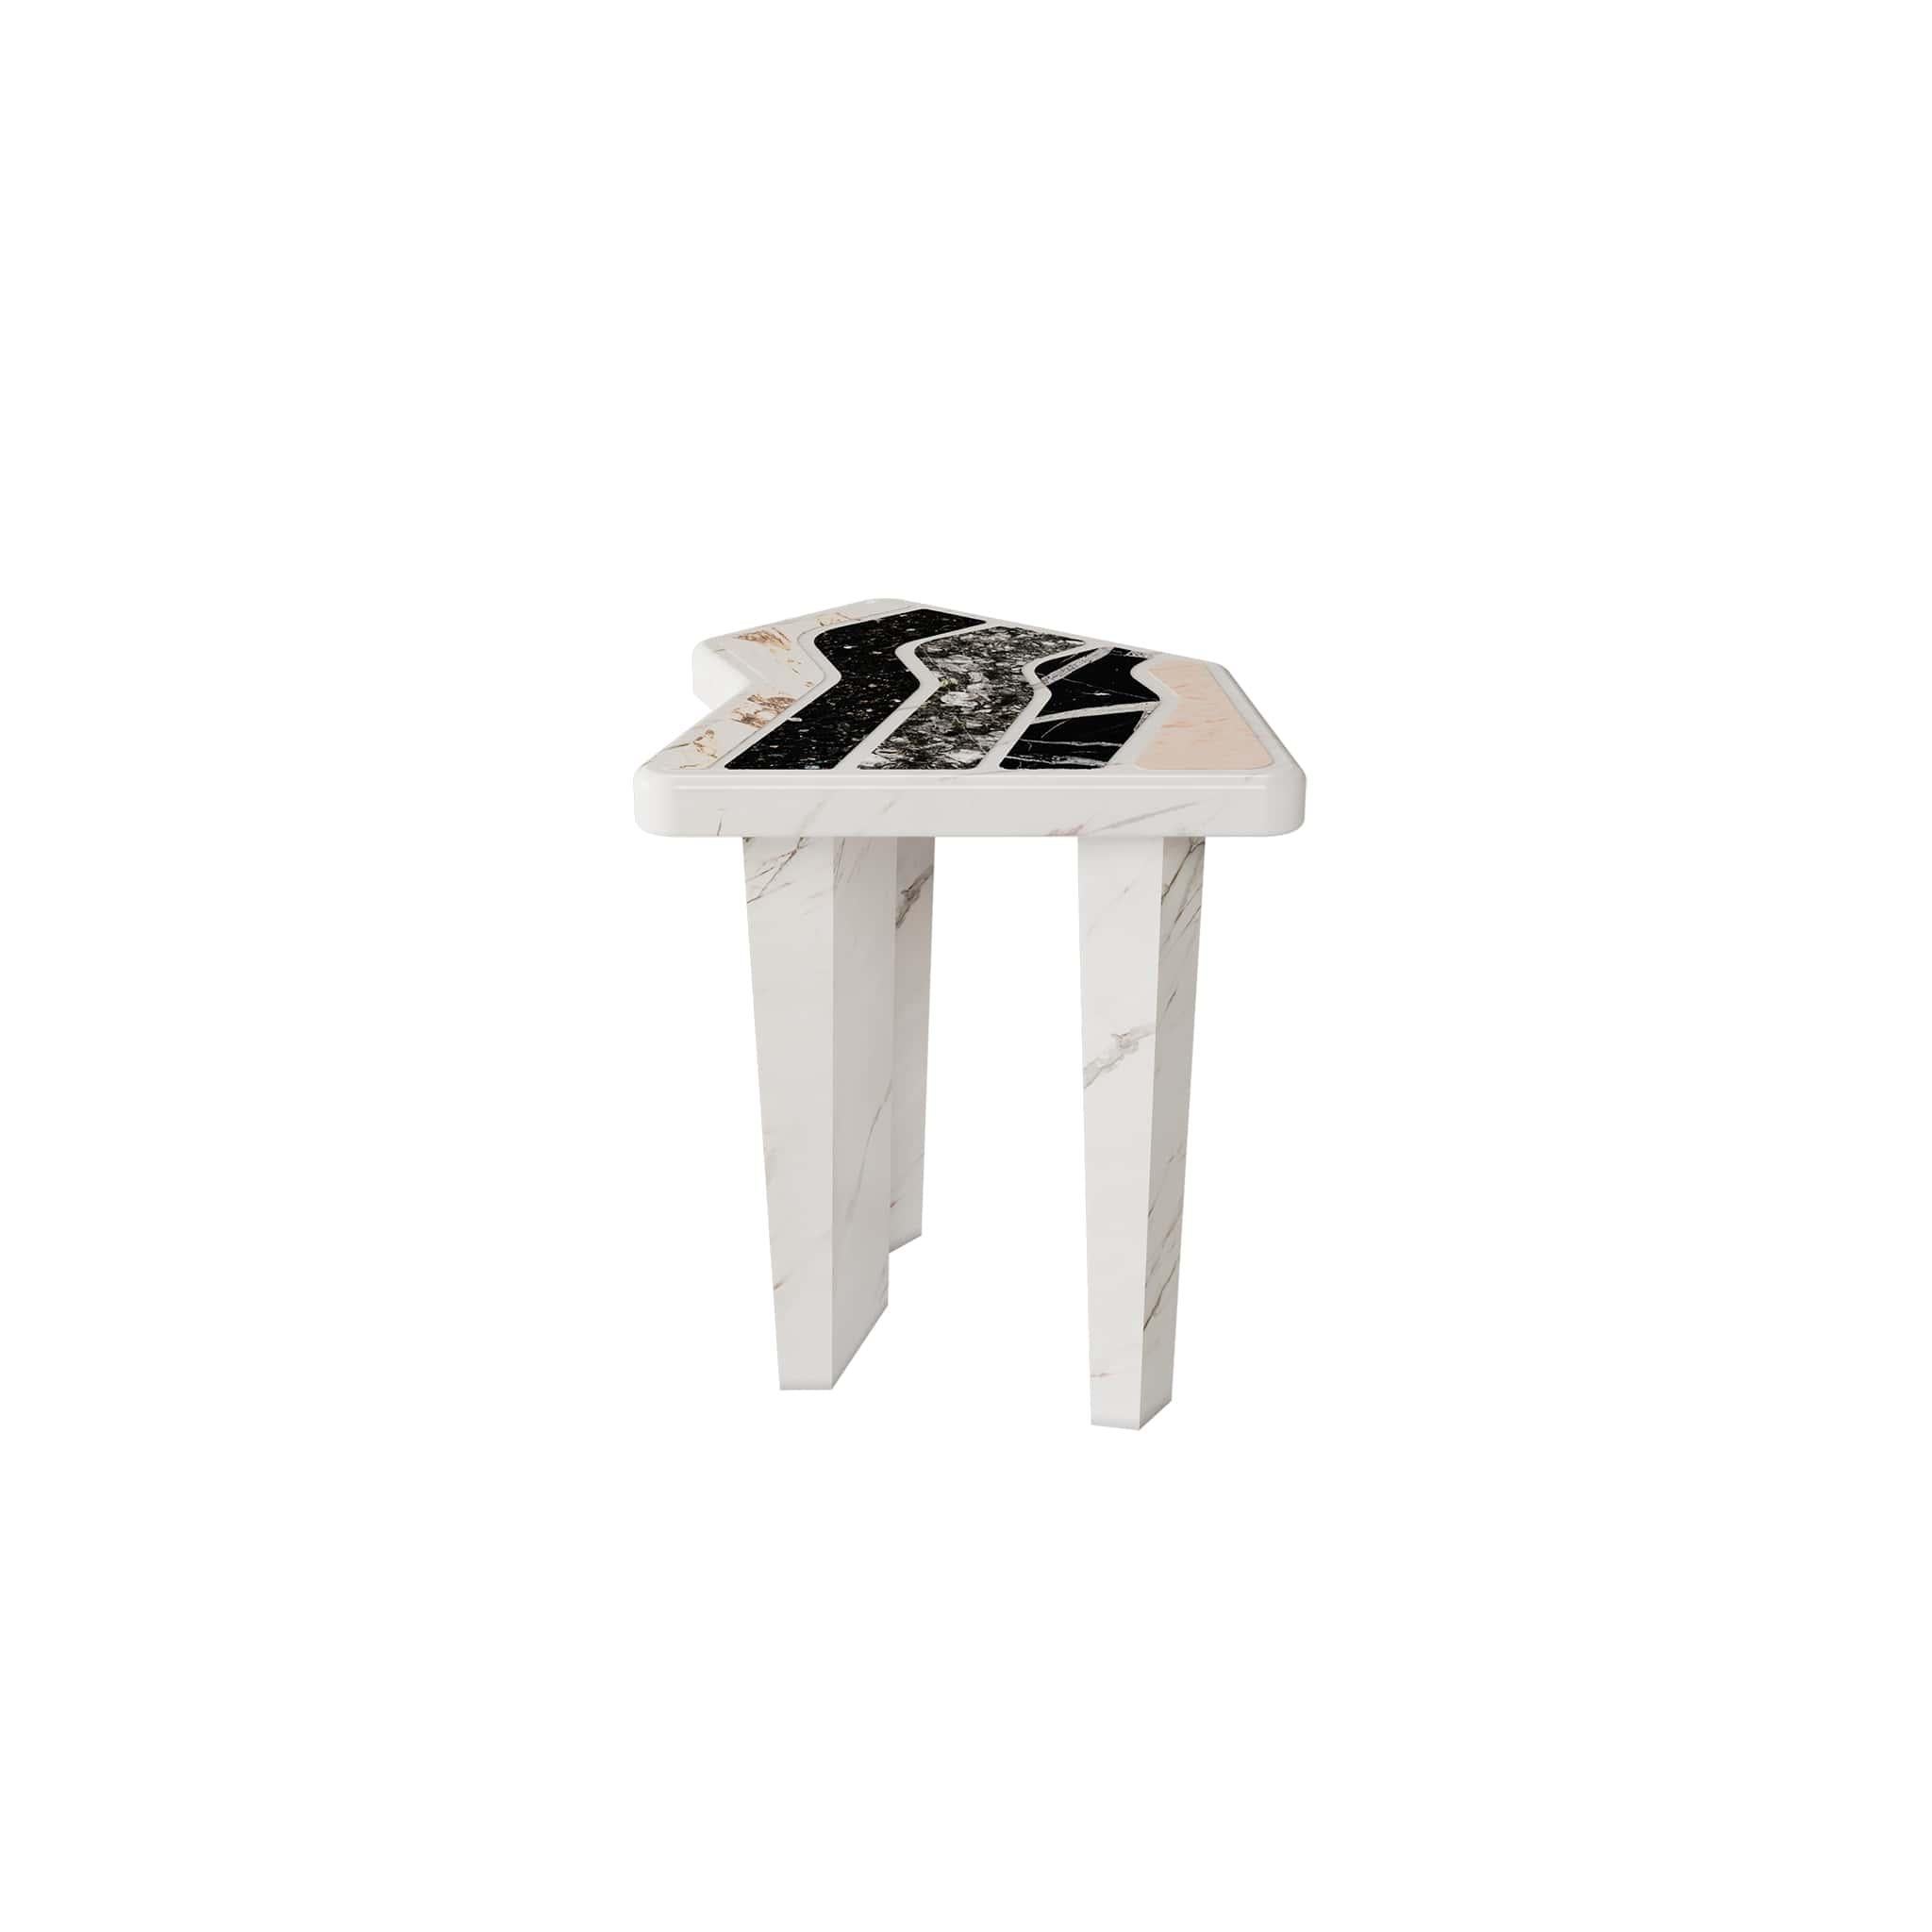 Contemporary Brutalist Geometrical shape coffee side table in granite & marble.

Utah Side Table is a cocktail table with an unexpected shape and beauty. Its body is built with a rich risk-taking composition of marble and granite. This side table